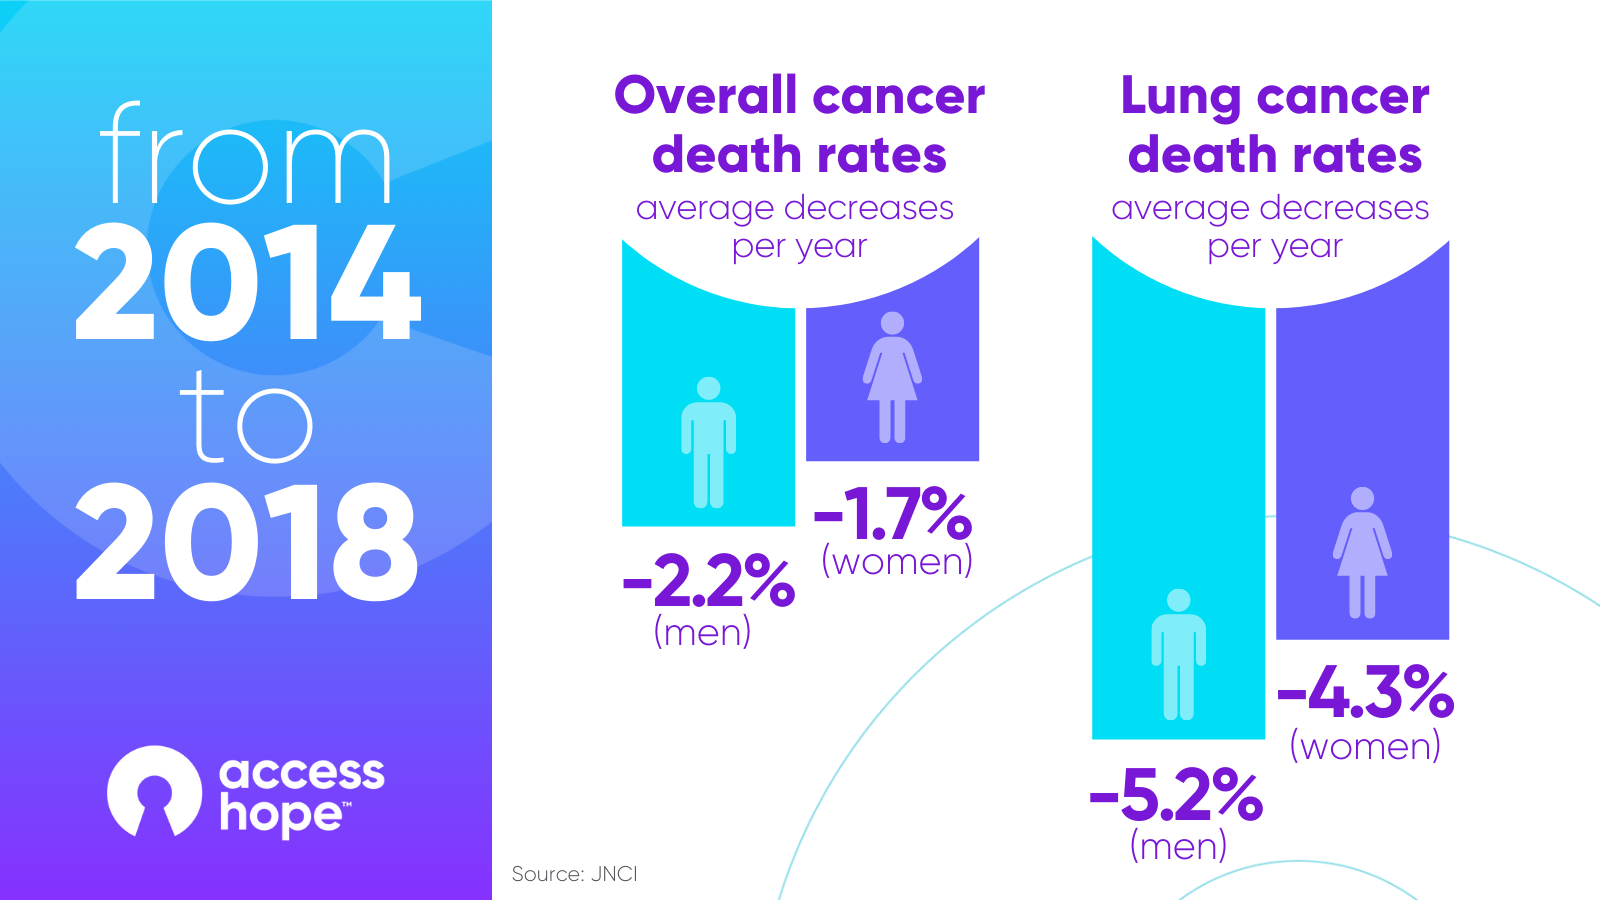 JNCI Stats showing decreases in overall cancer and lung cancer death rates